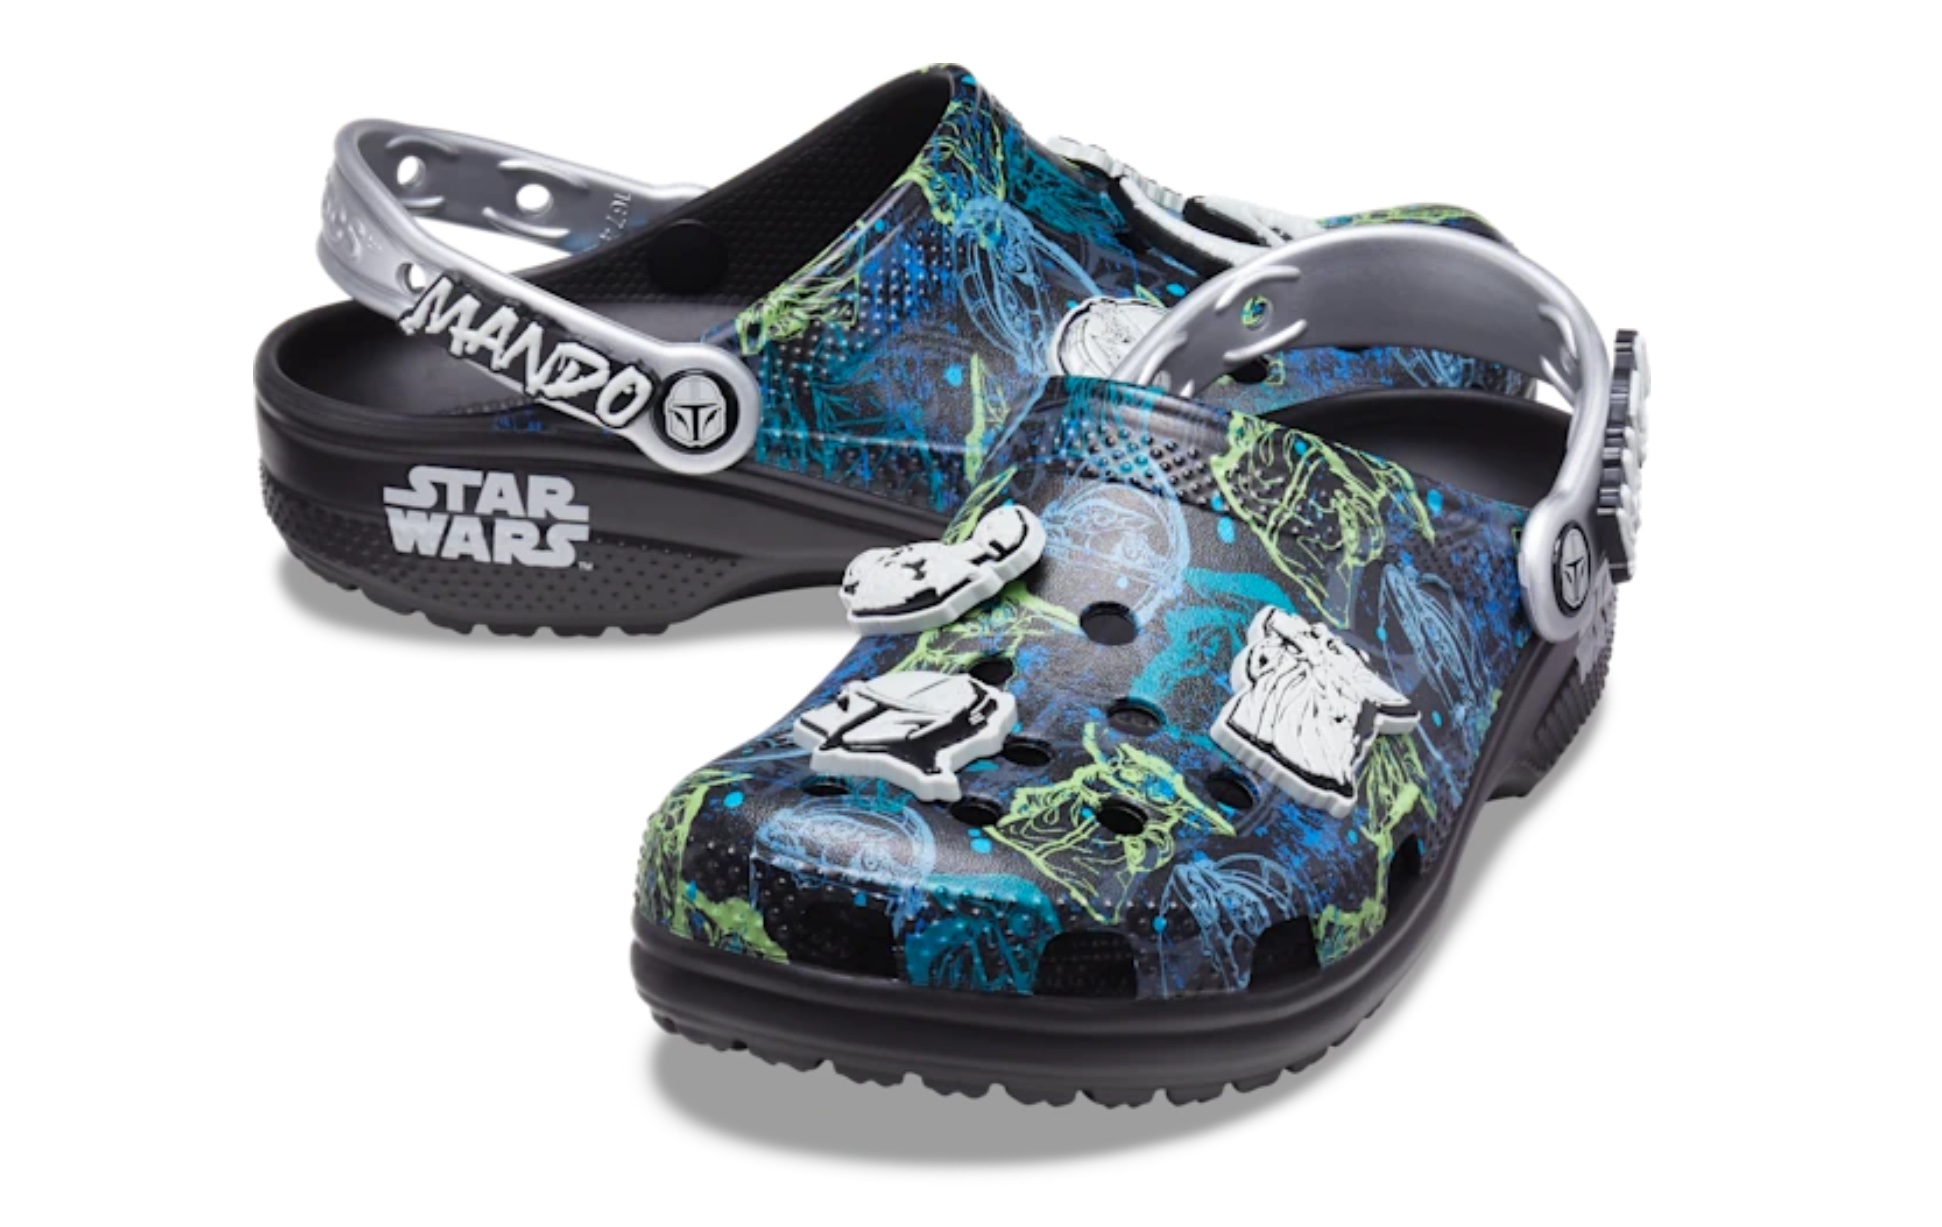 Crocs debuts a new Star Wars collection 